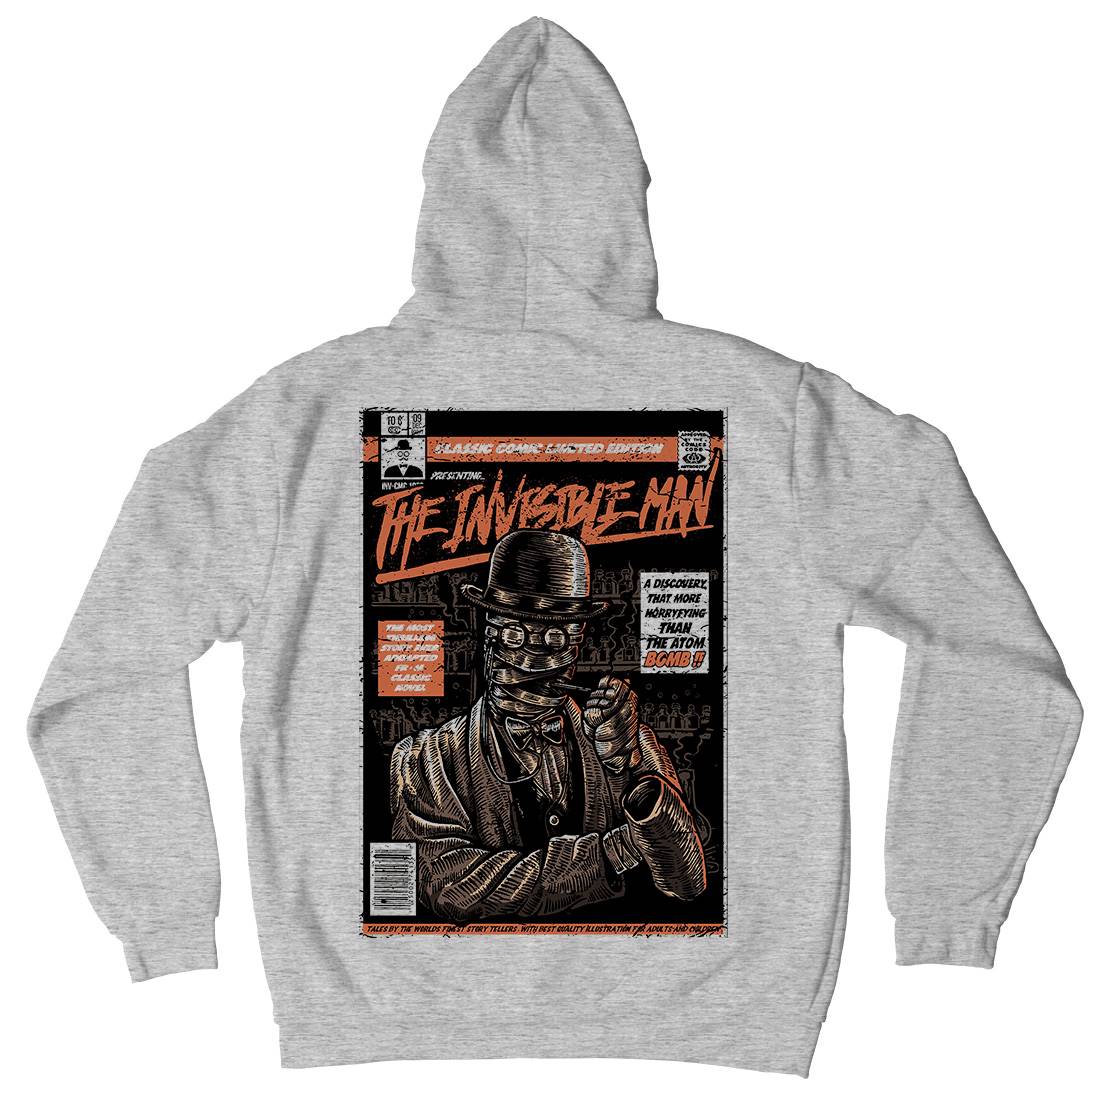 Invisible Man Kids Crew Neck Hoodie Horror A581